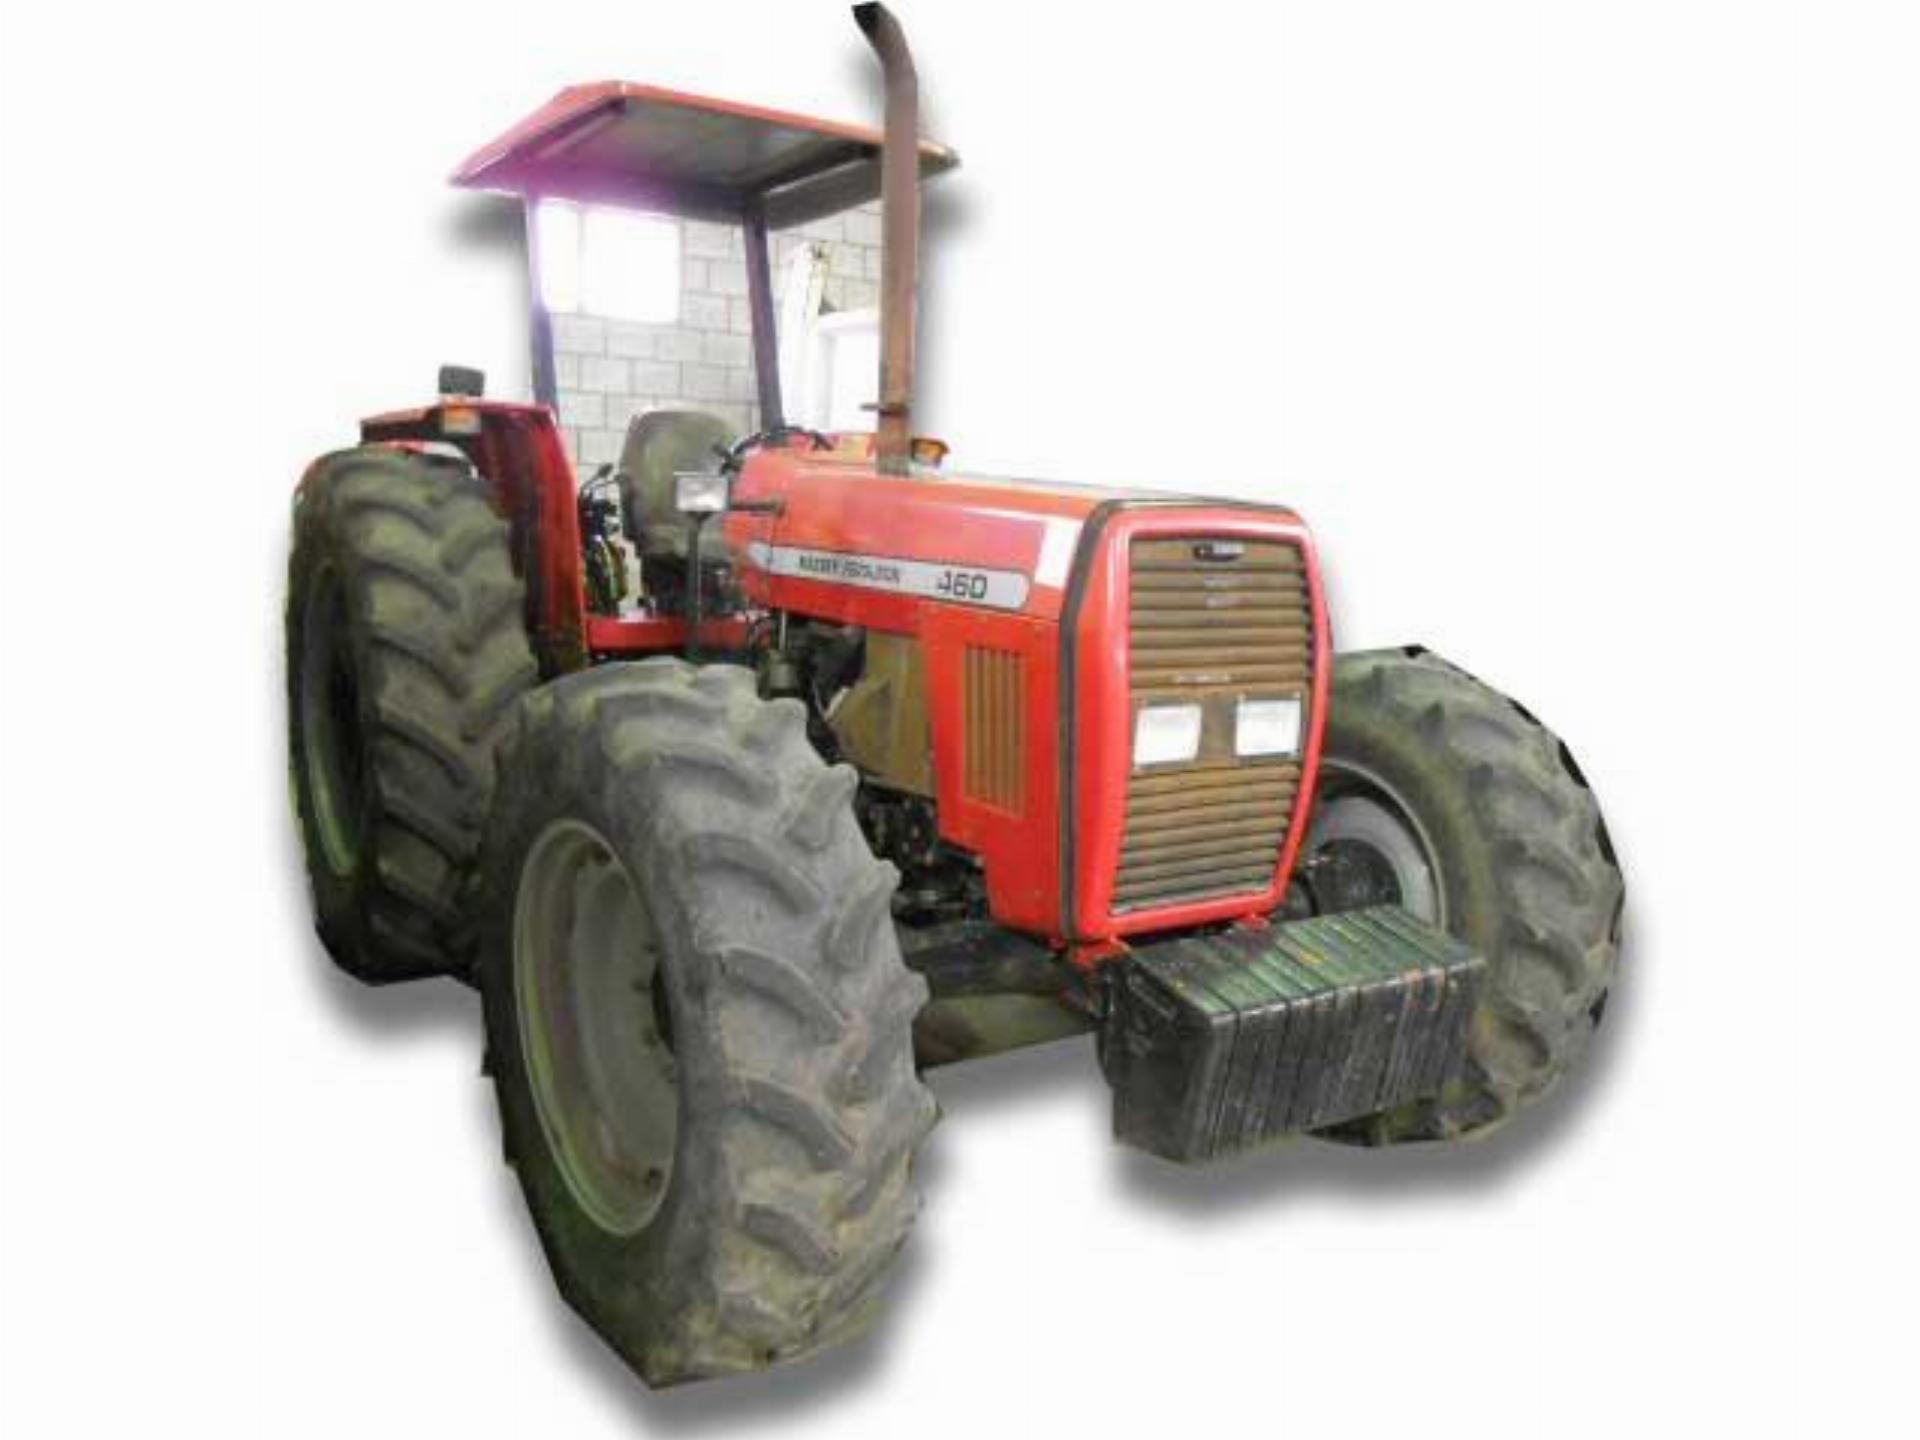 Massey Ferguson Agricultural Goods Tractor 460 4WD